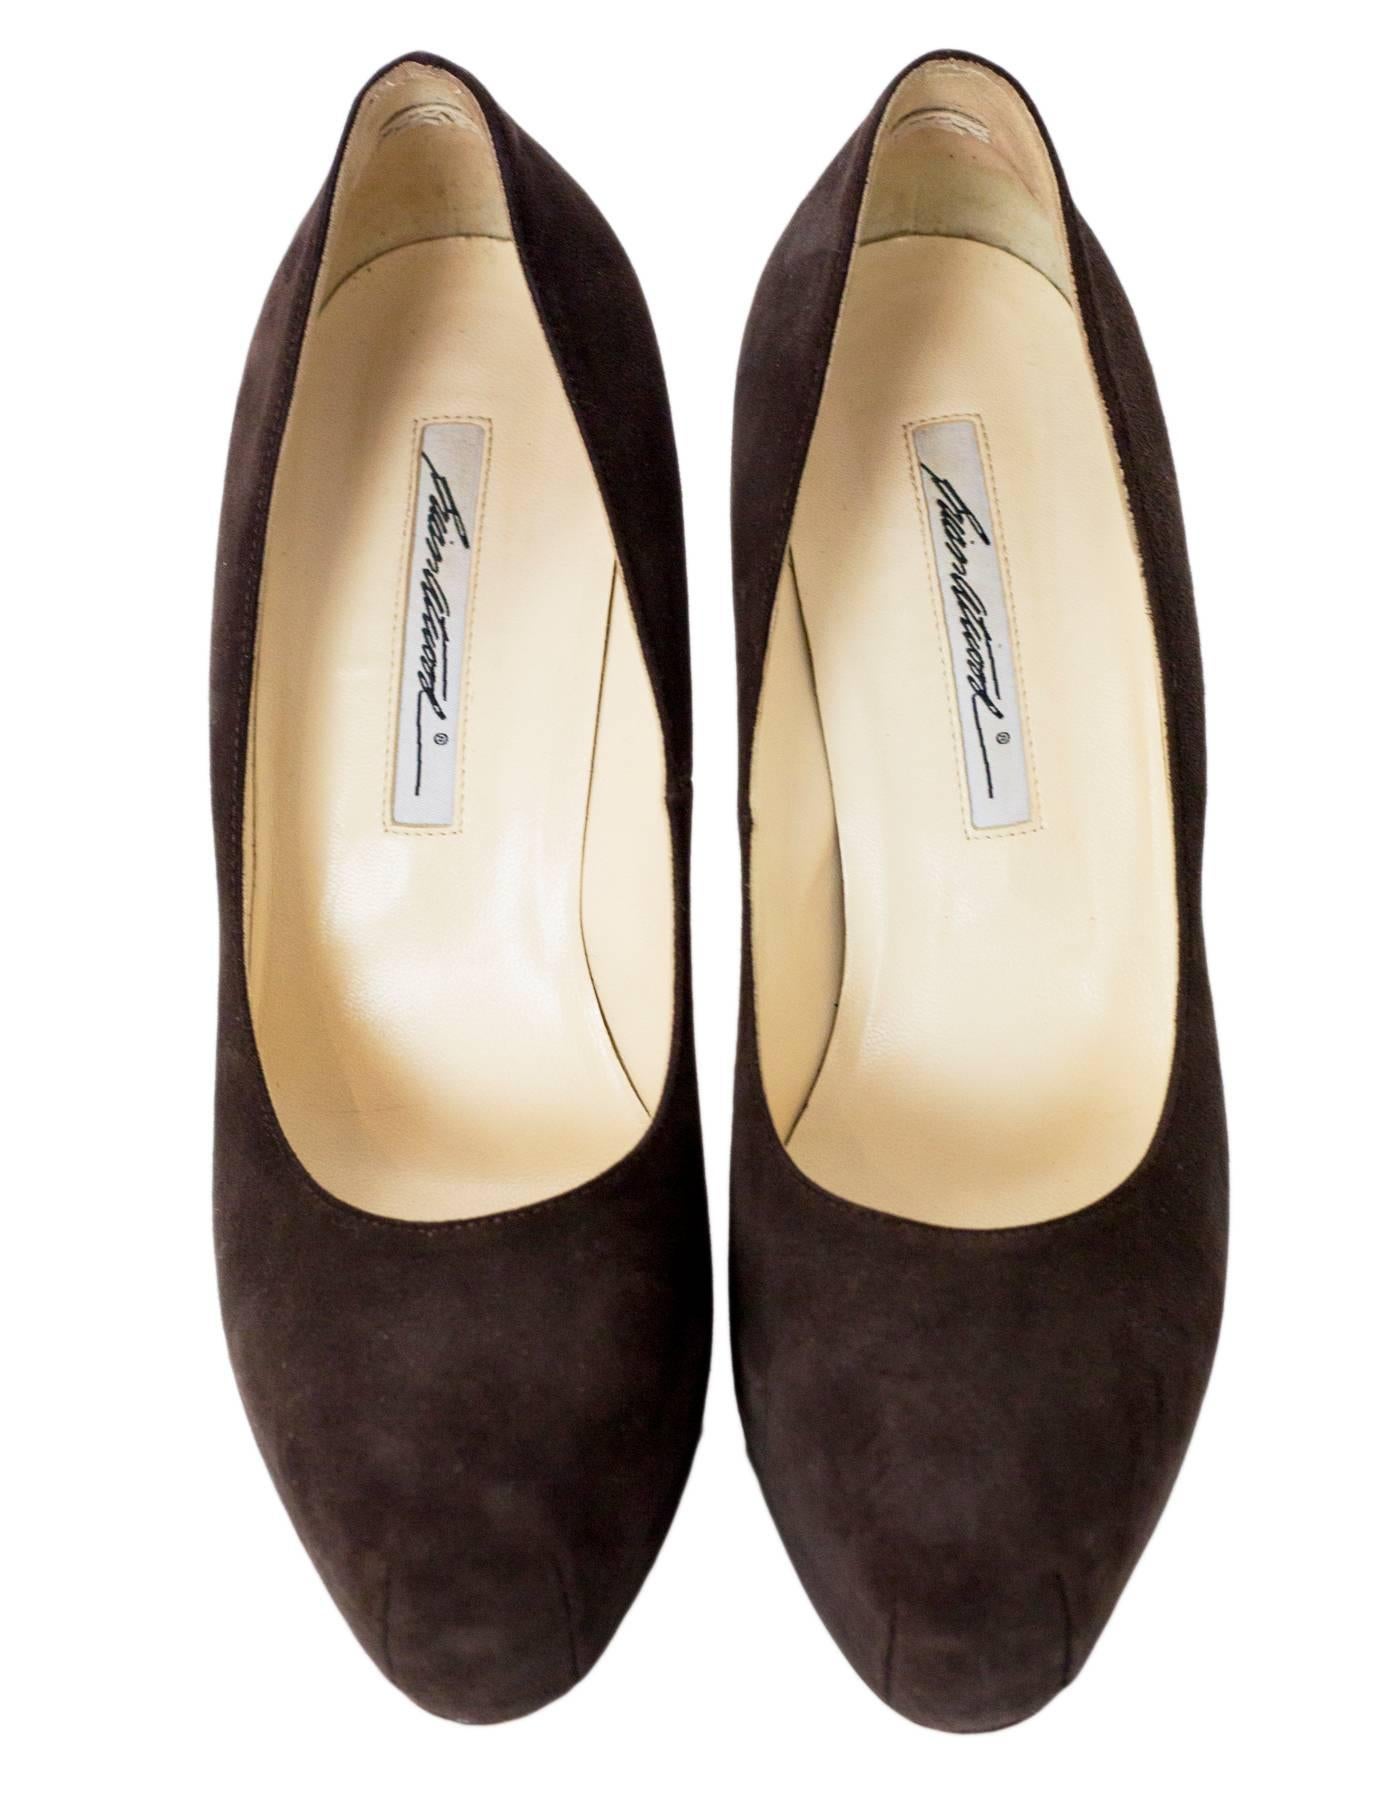 Brian Atwood Brown Suede Maniac Pumps Sz 39

Made In: Italy
Color: Brown
Materials: Suede
Closure/Opening: Slide on
Sole Stamp: Brian Atwood vero cuoio made in italy 39
Overall Condition: Excellent pre-owned condition with the exception of light